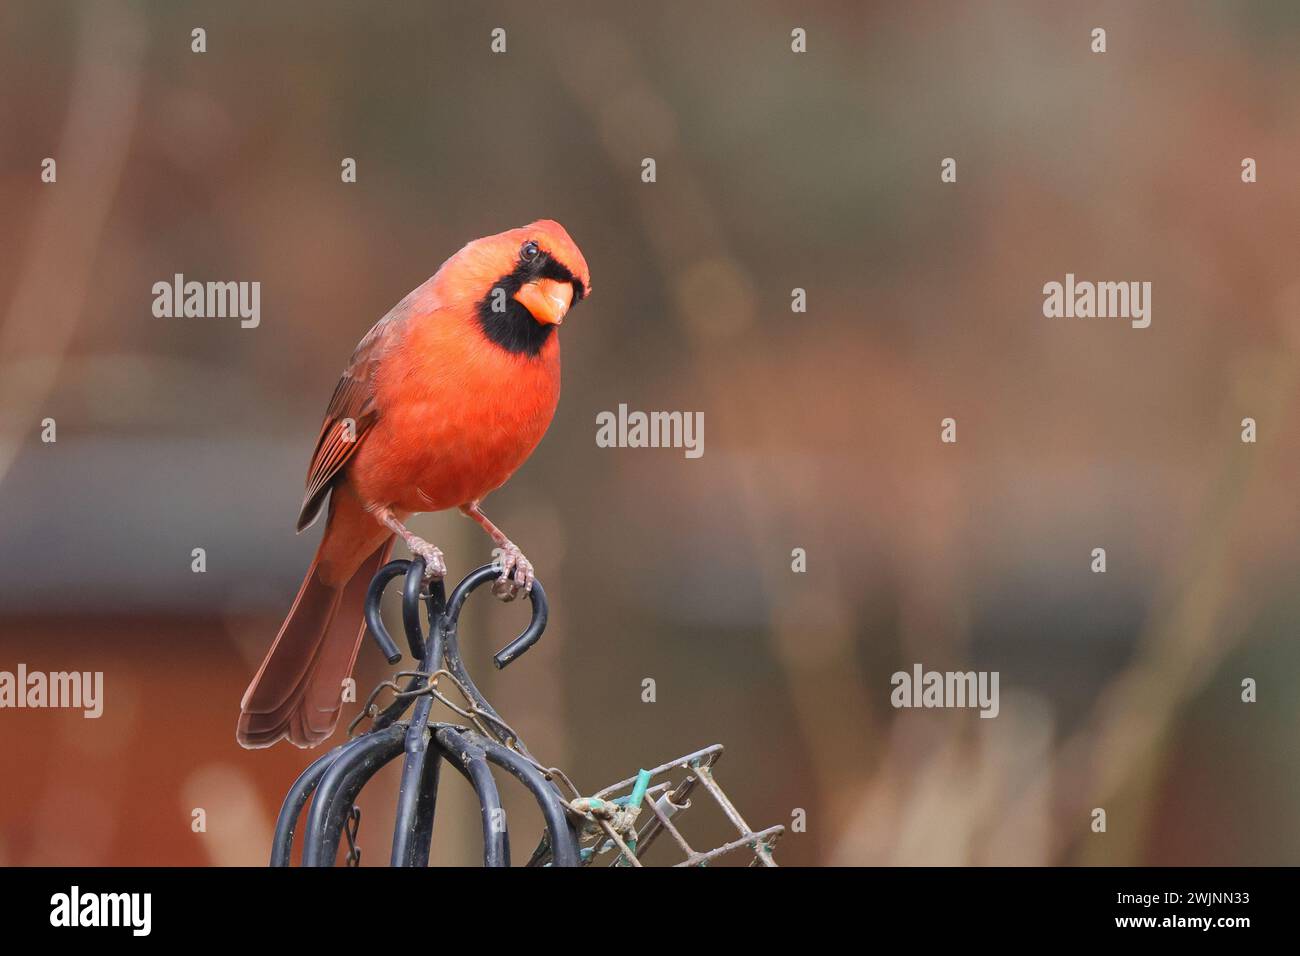 Cardinal perched on metal planter filled with bird seed Stock Photo